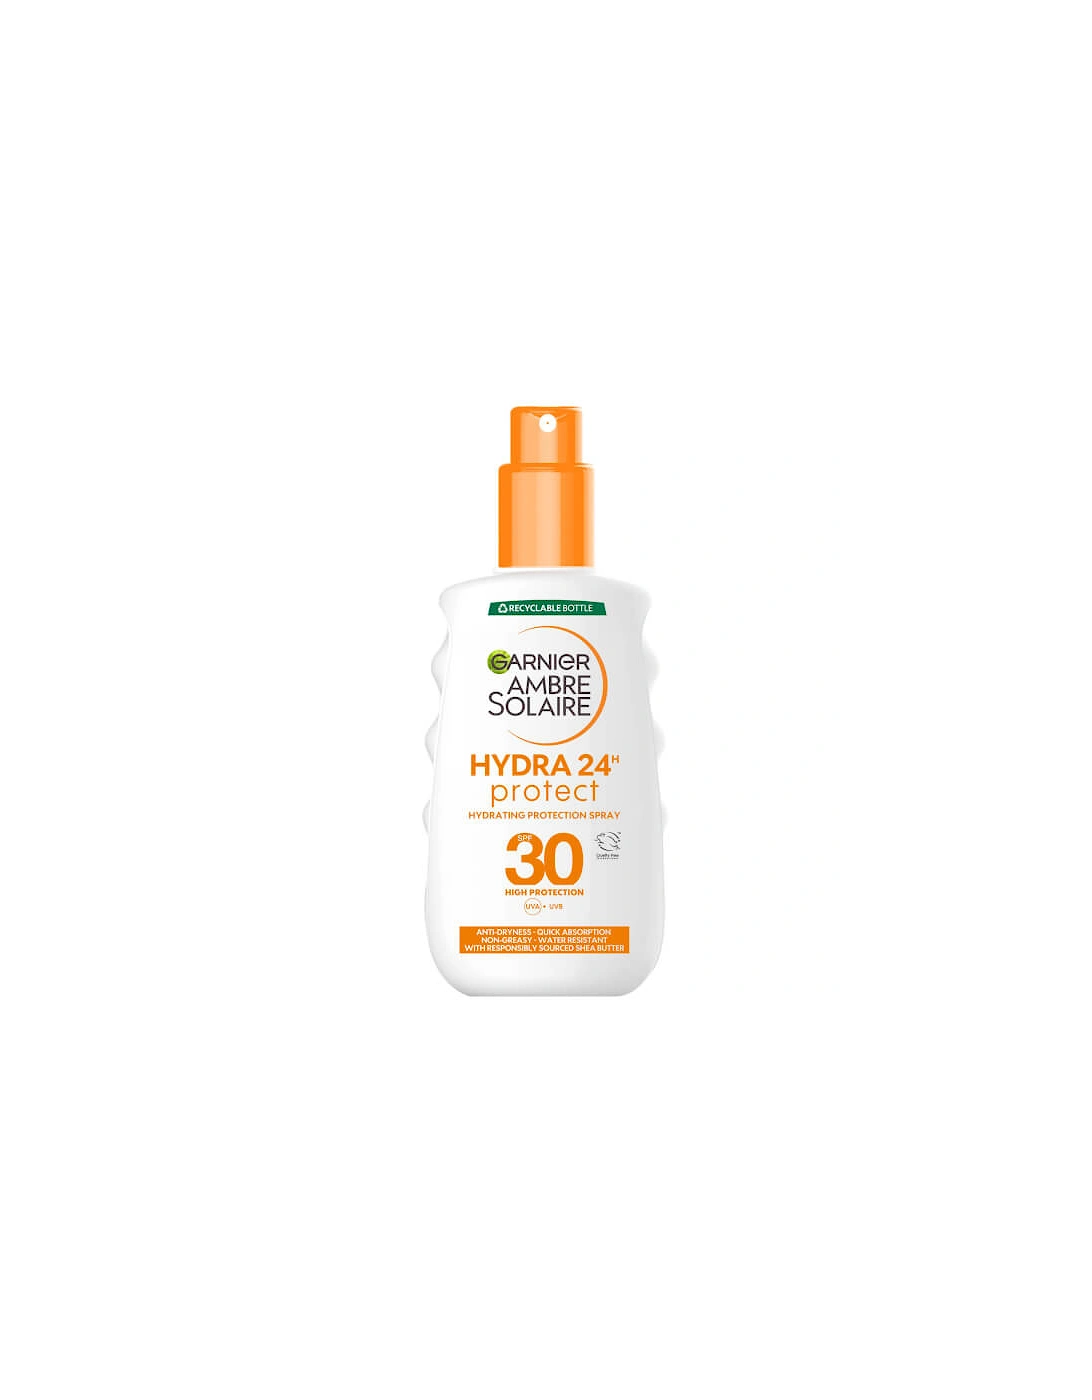 Ambre Solaire Protection Spray 24h Hydration SPF30 200ml - Garnier, 2 of 1